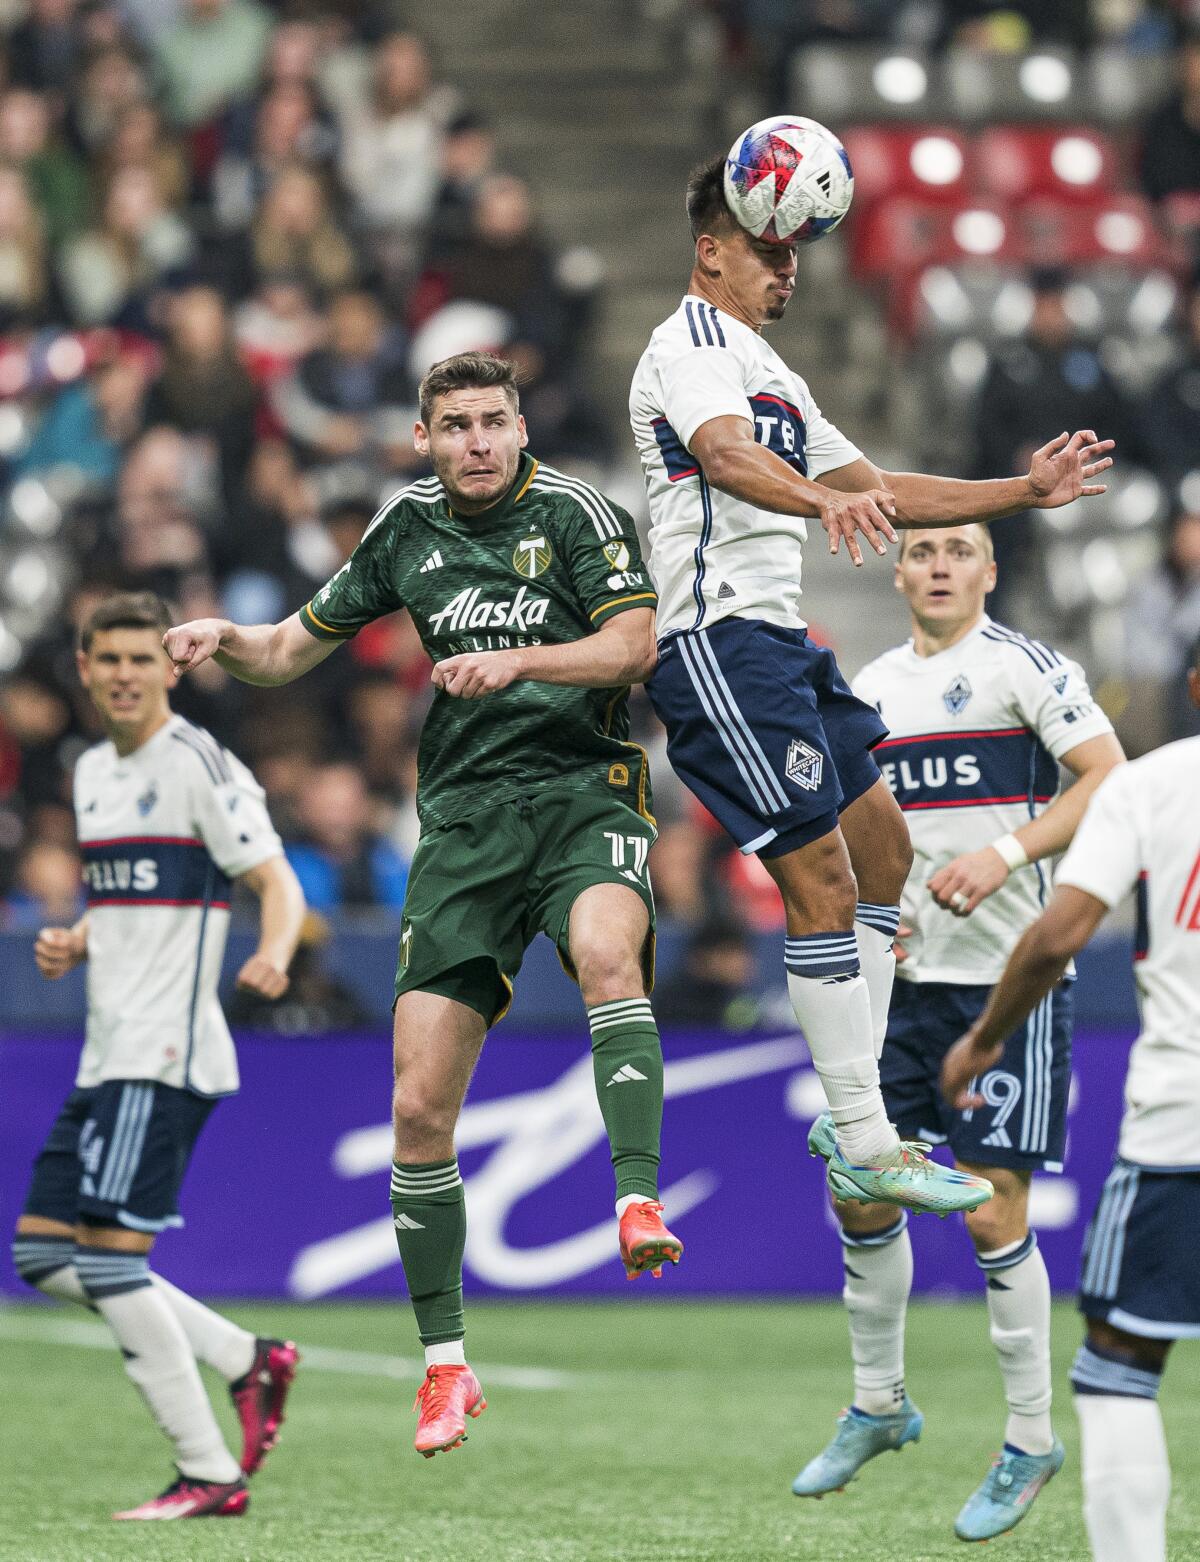 White's goal lifts Whitecaps to 1-0 victory over Timbers - The Columbian